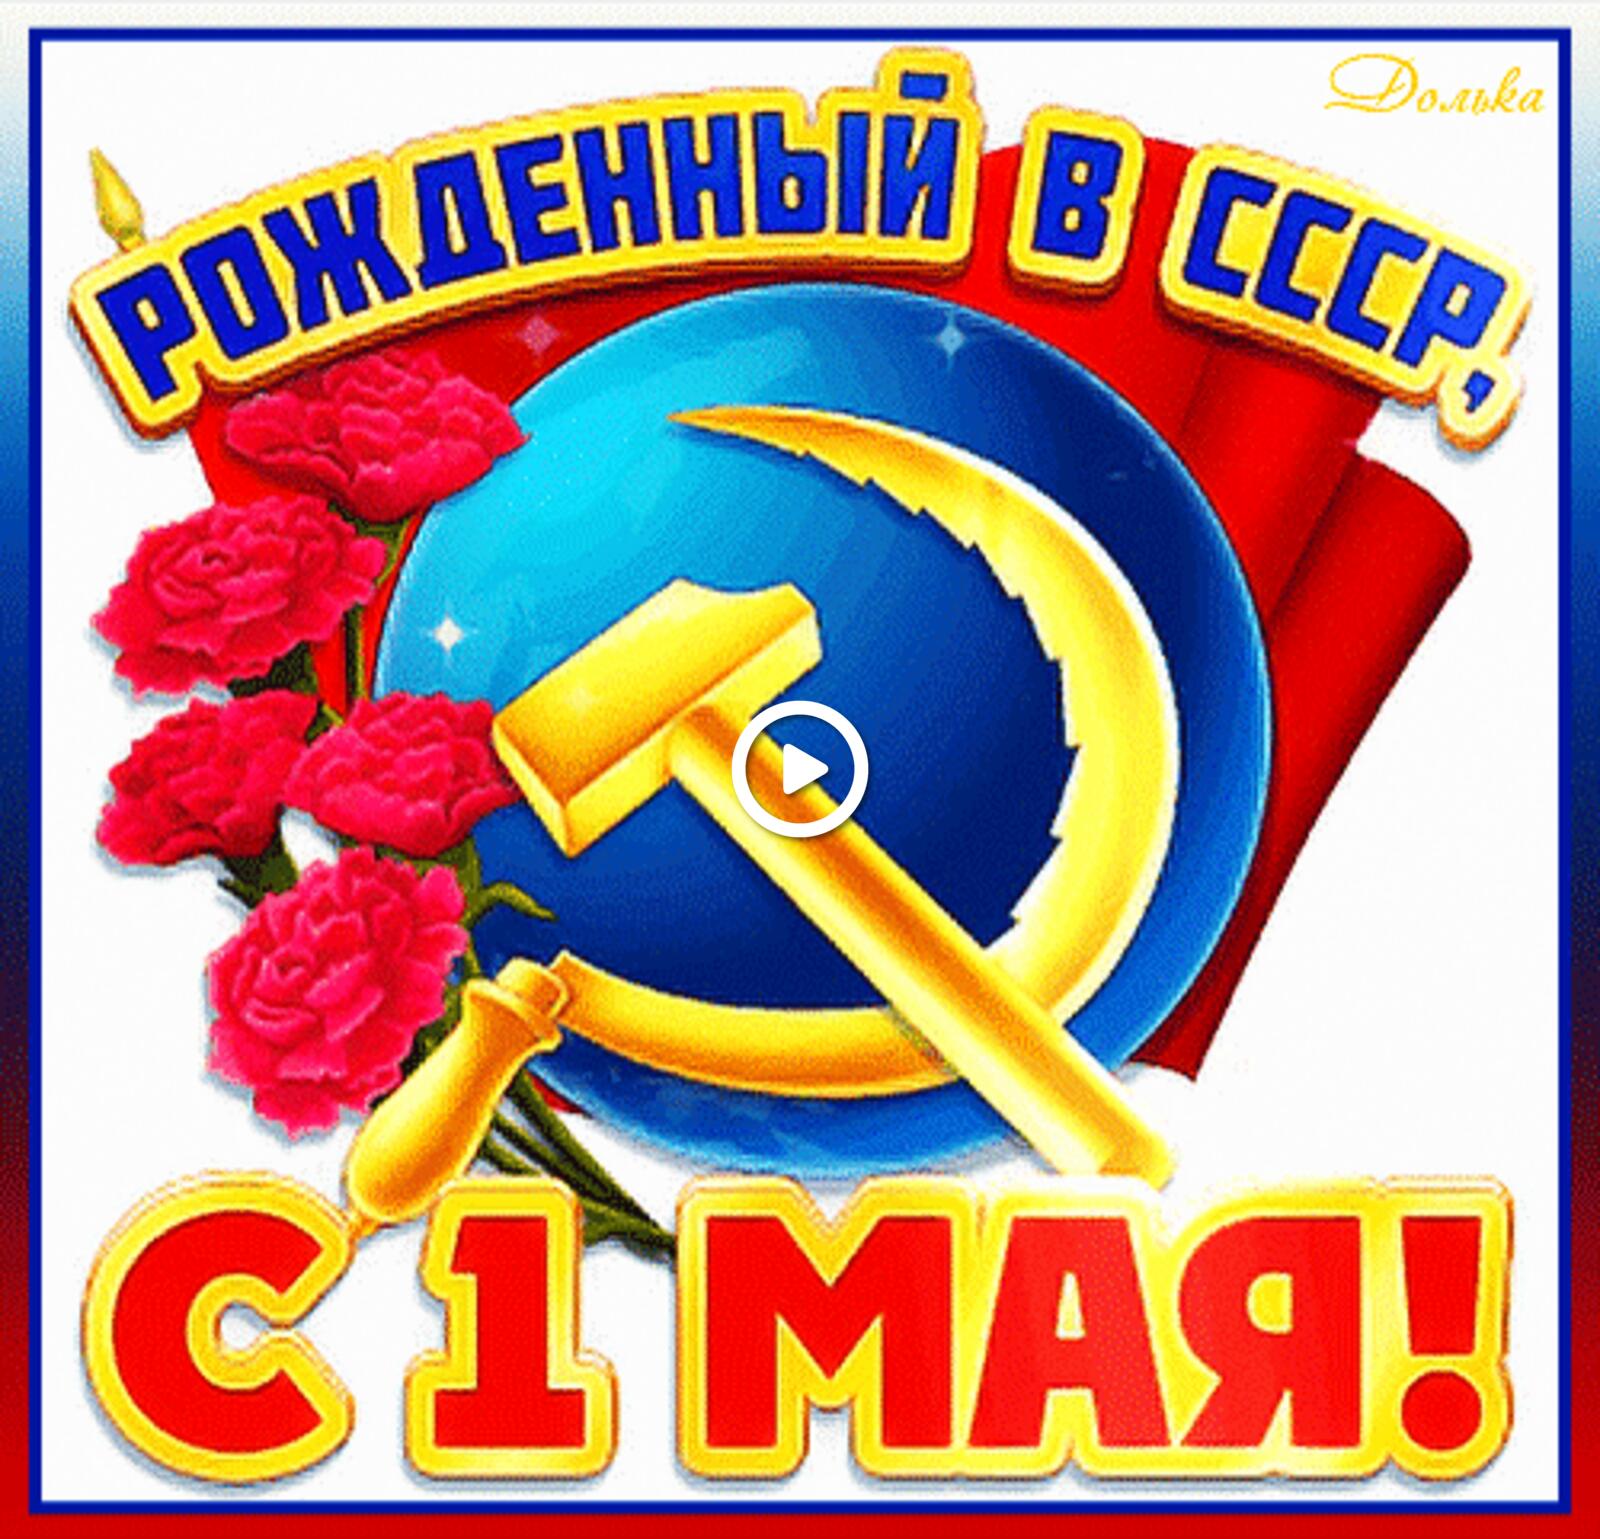 A postcard on the subject of as of may 1 holiday USSR for free